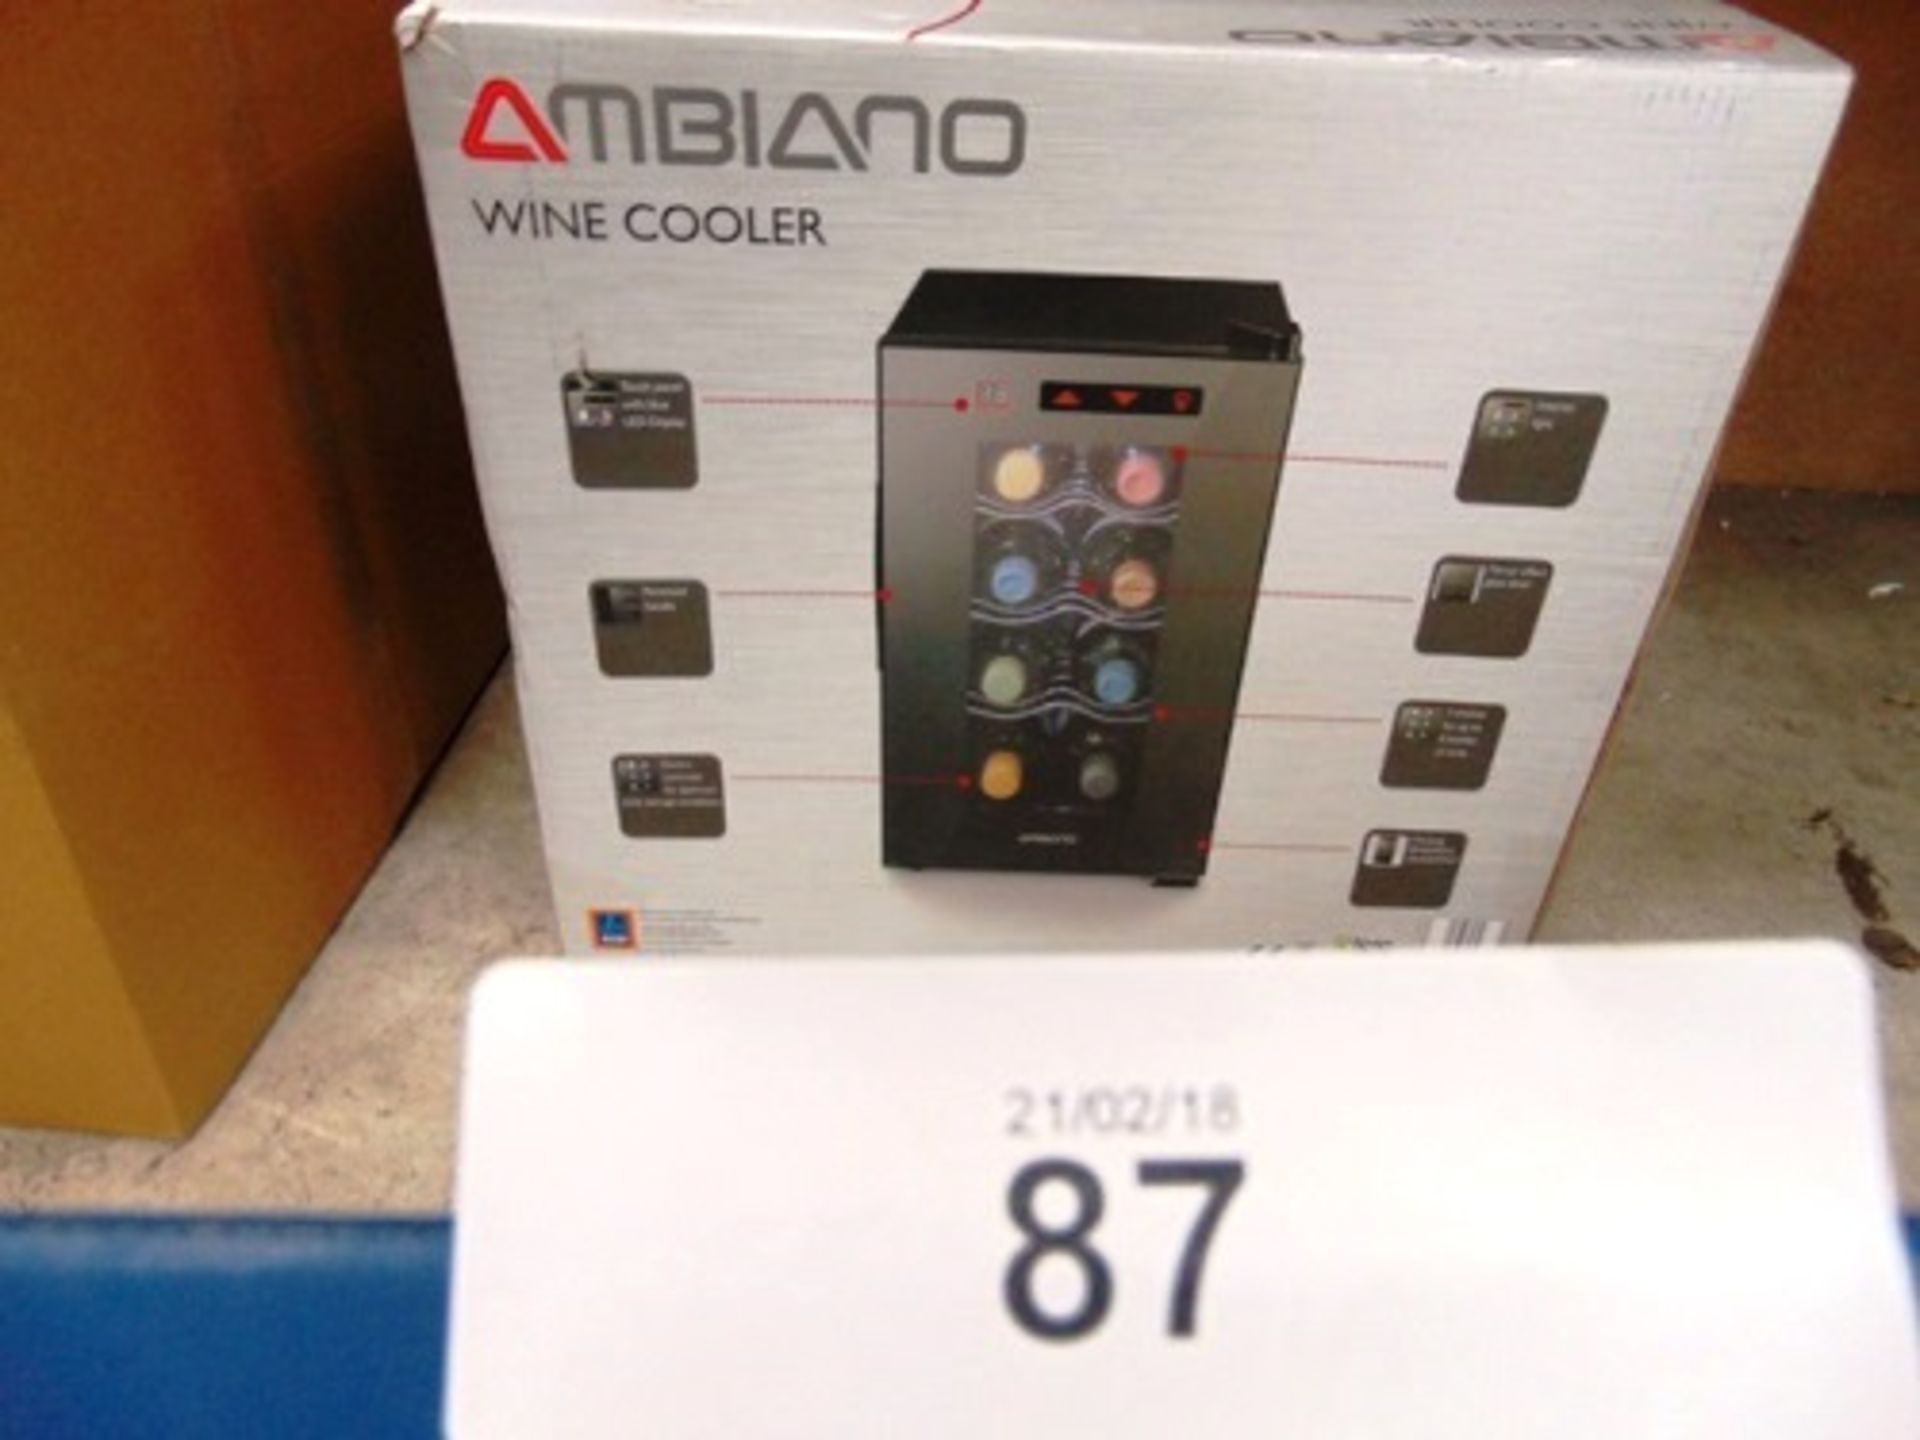 1 x Ambiano wine cooler 21ltr capacity, model 79149 - Sealed new in box (ESB3)